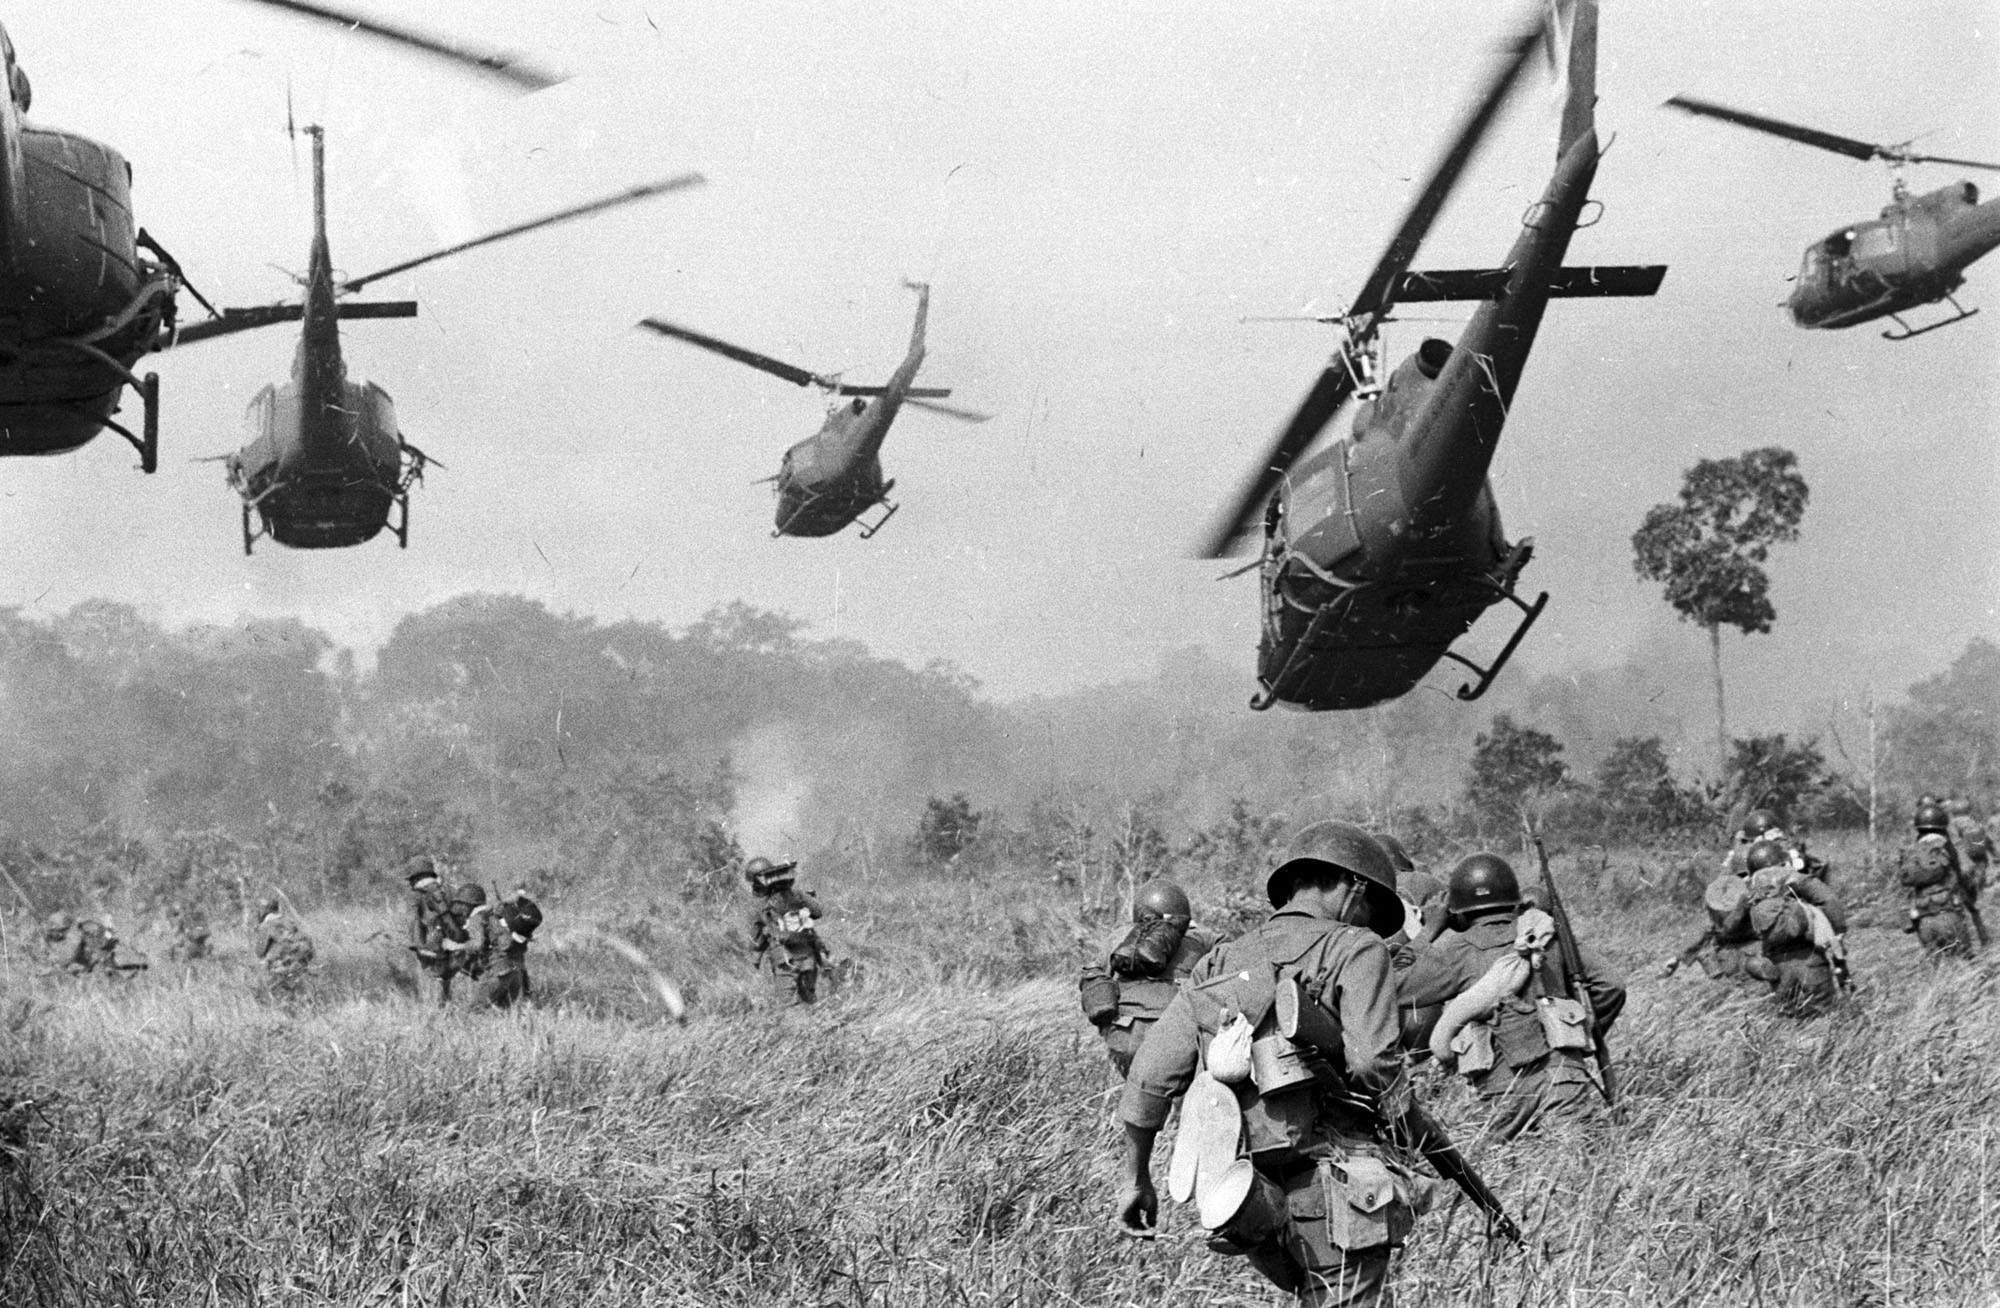 The Language of the Vietnam War: 40 Terms